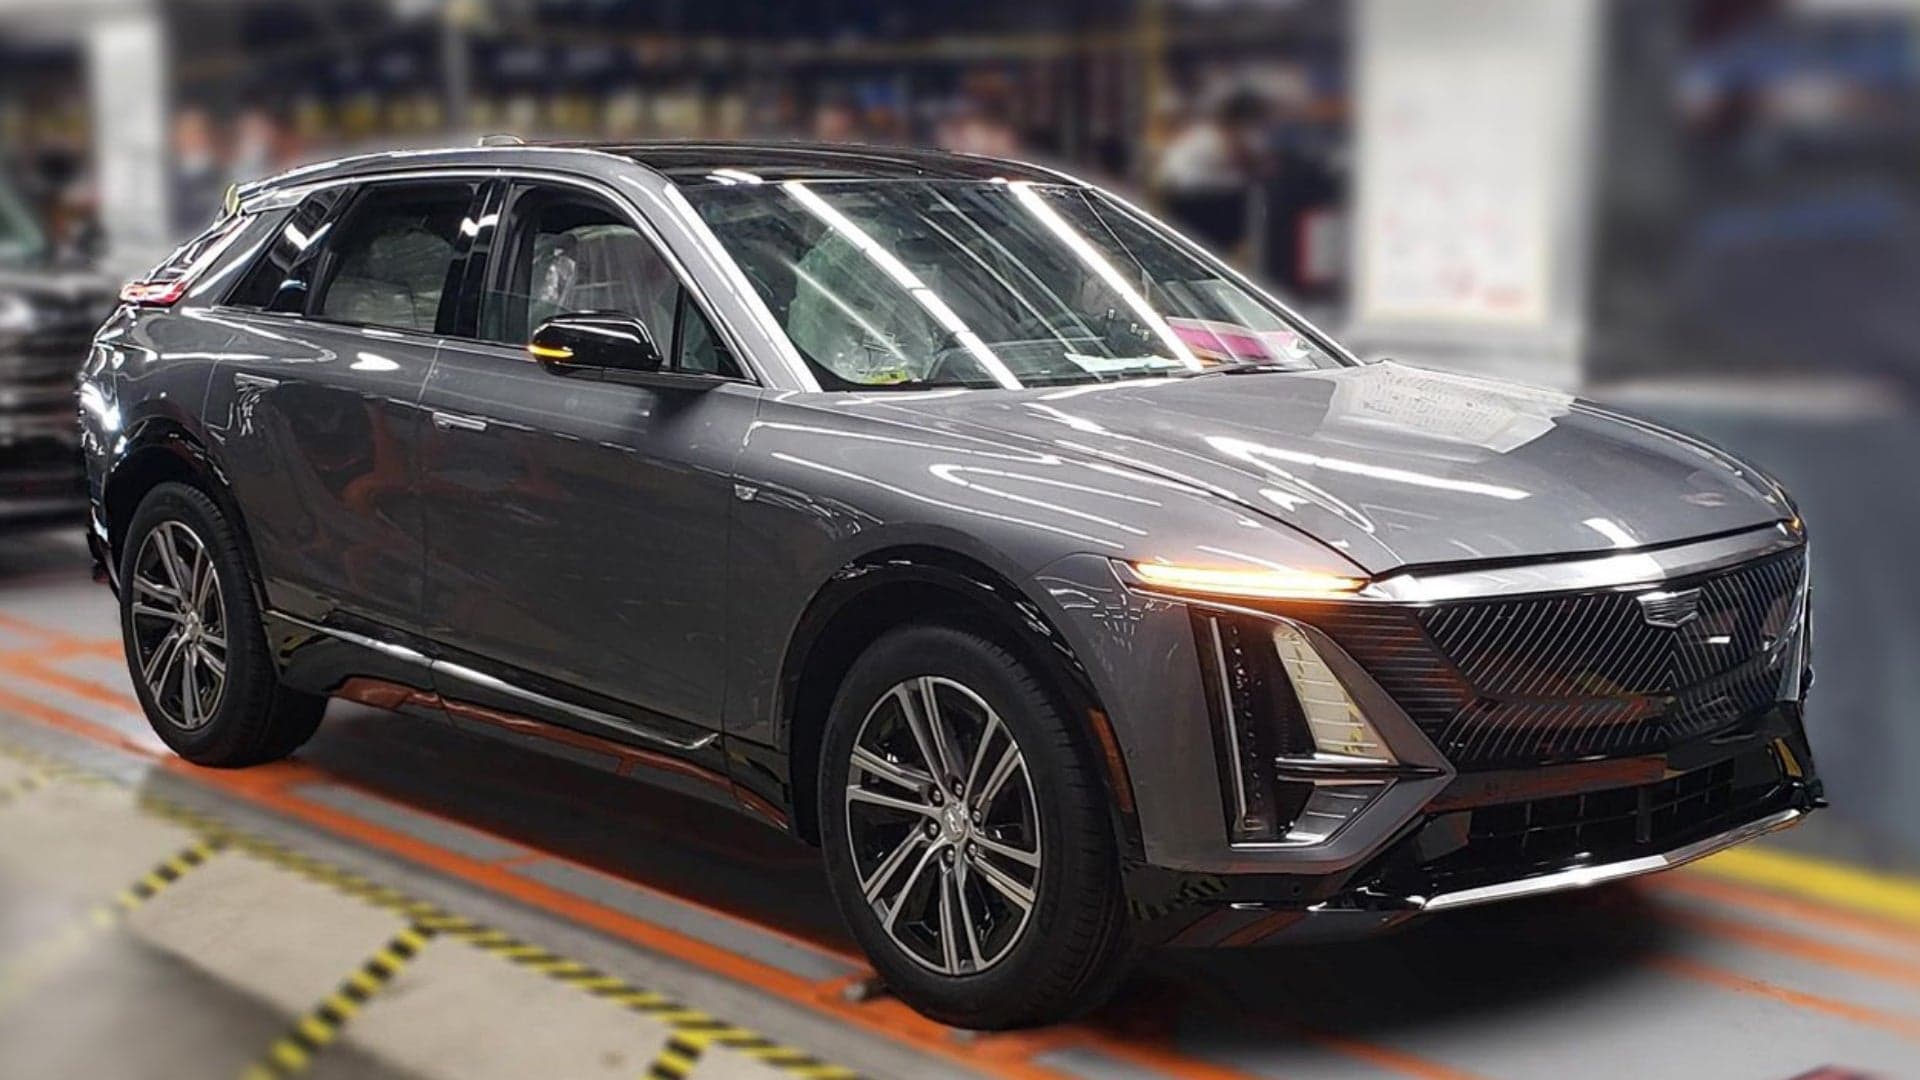 First Pre-Production Cadillac Lyriq Built, Deliveries Begin ‘In a Few Months’